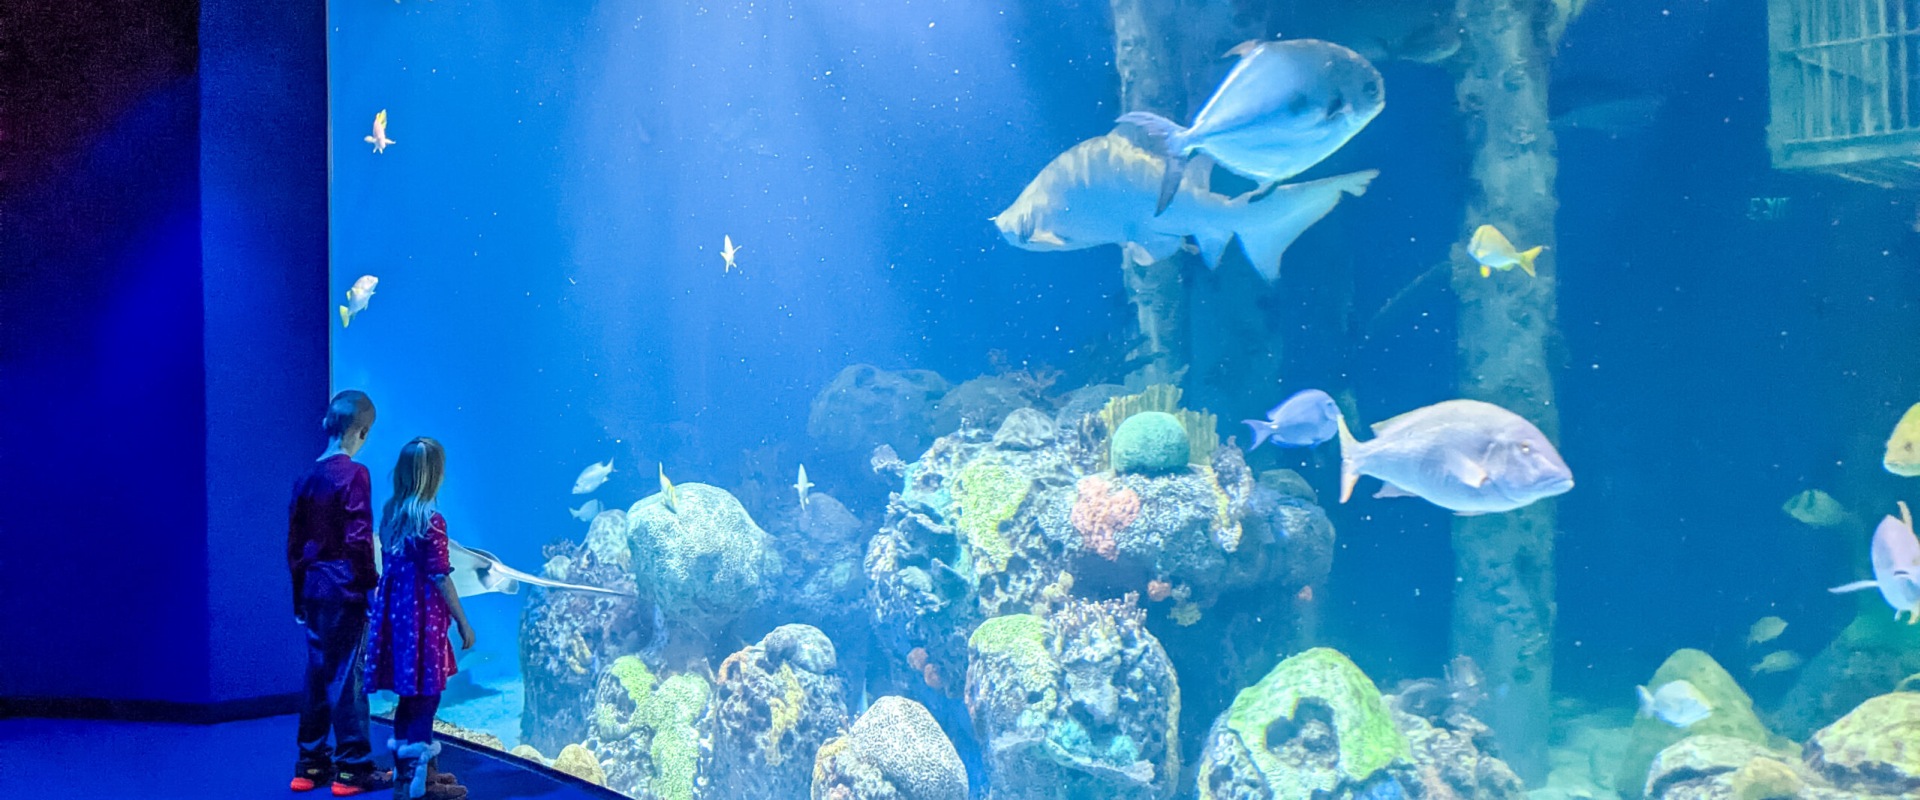 Exploring Aquariums in Indiana and Beyond - 8b376545f957e1600ccaD01c492c366D